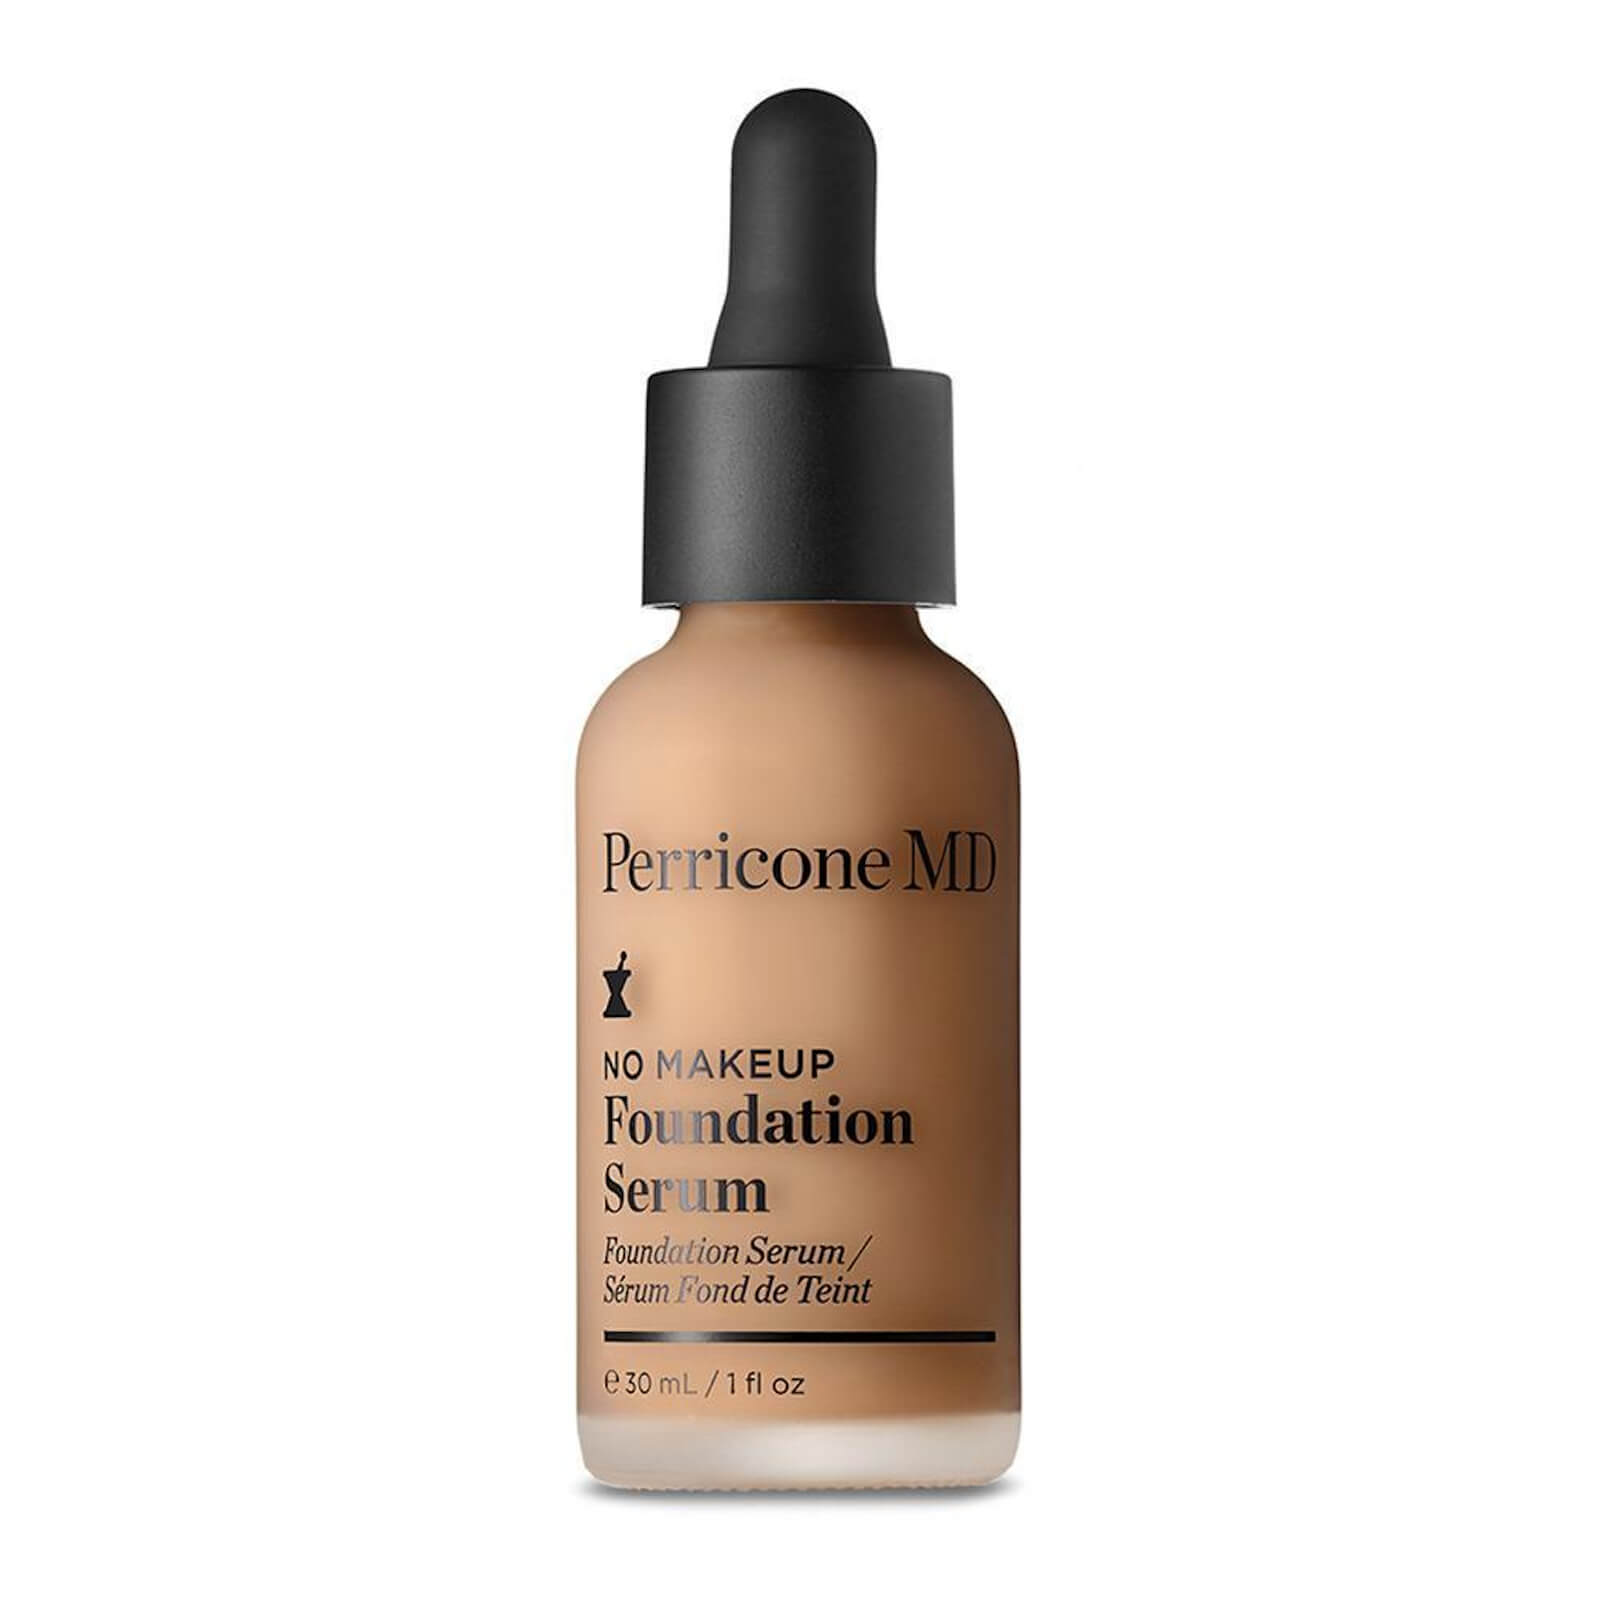 Perricone MD No Makeup Foundation Serum SPF 20 30ml (Various Shades) - 5 Beige